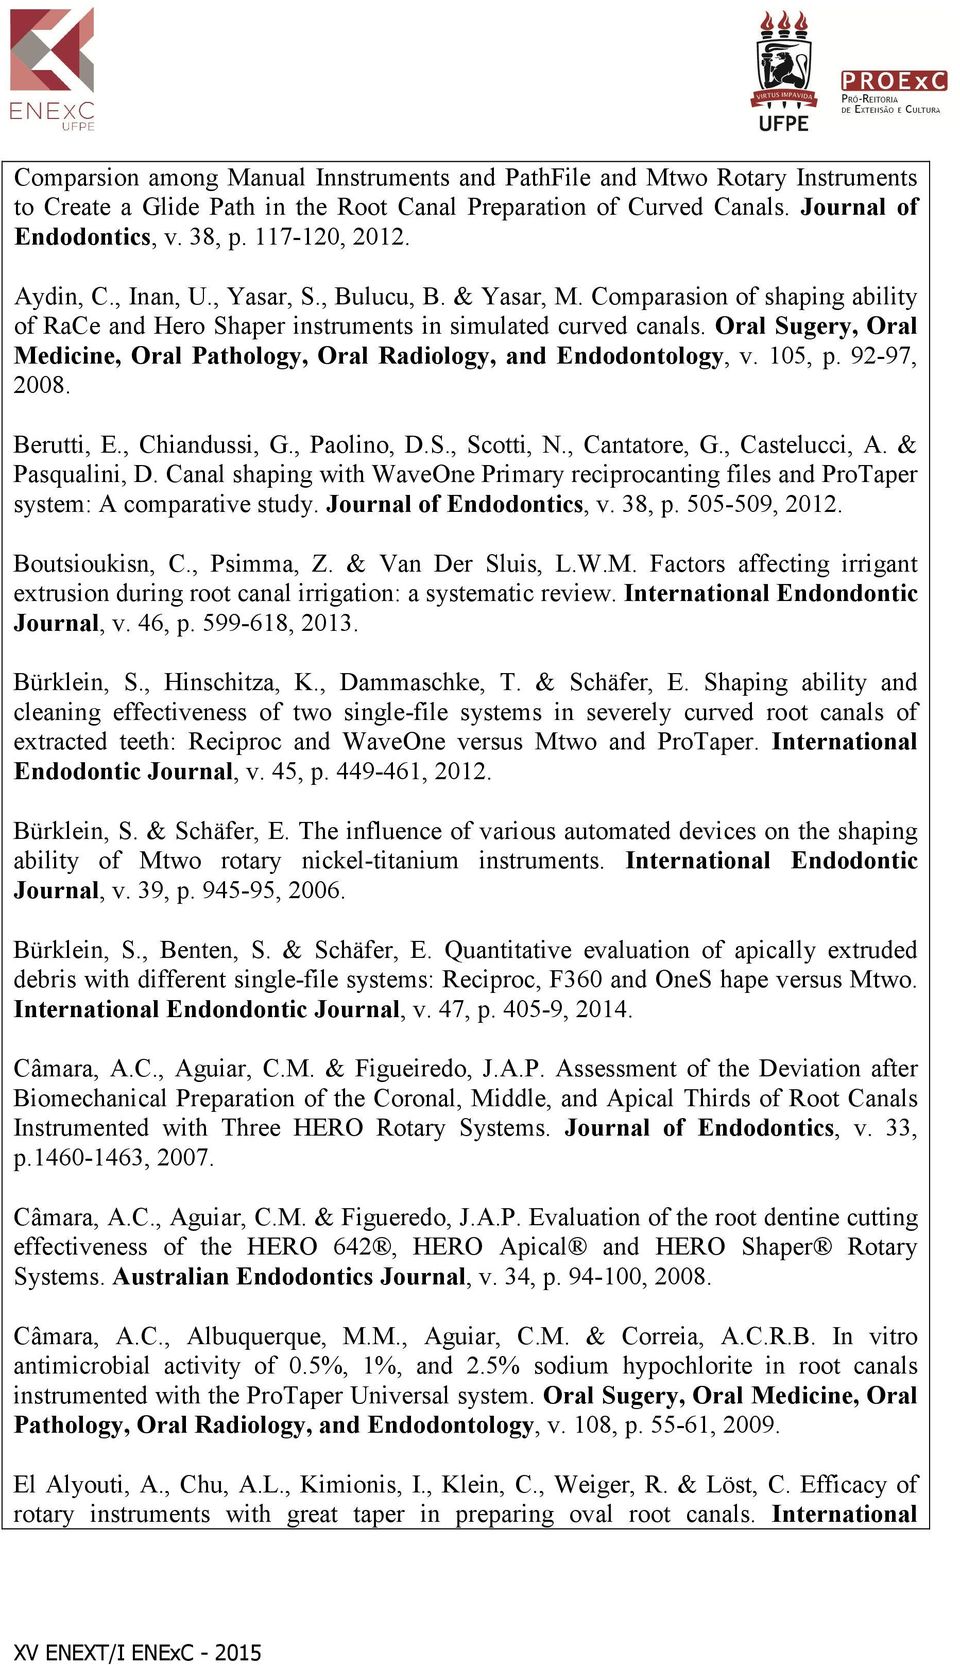 Oral Sugery, Oral Medicine, Oral Pathology, Oral Radiology, and Endodontology, v. 105, p. 92-97, 2008. Berutti, E., Chiandussi, G., Paolino, D.S., Scotti, N., Cantatore, G., Castelucci, A.